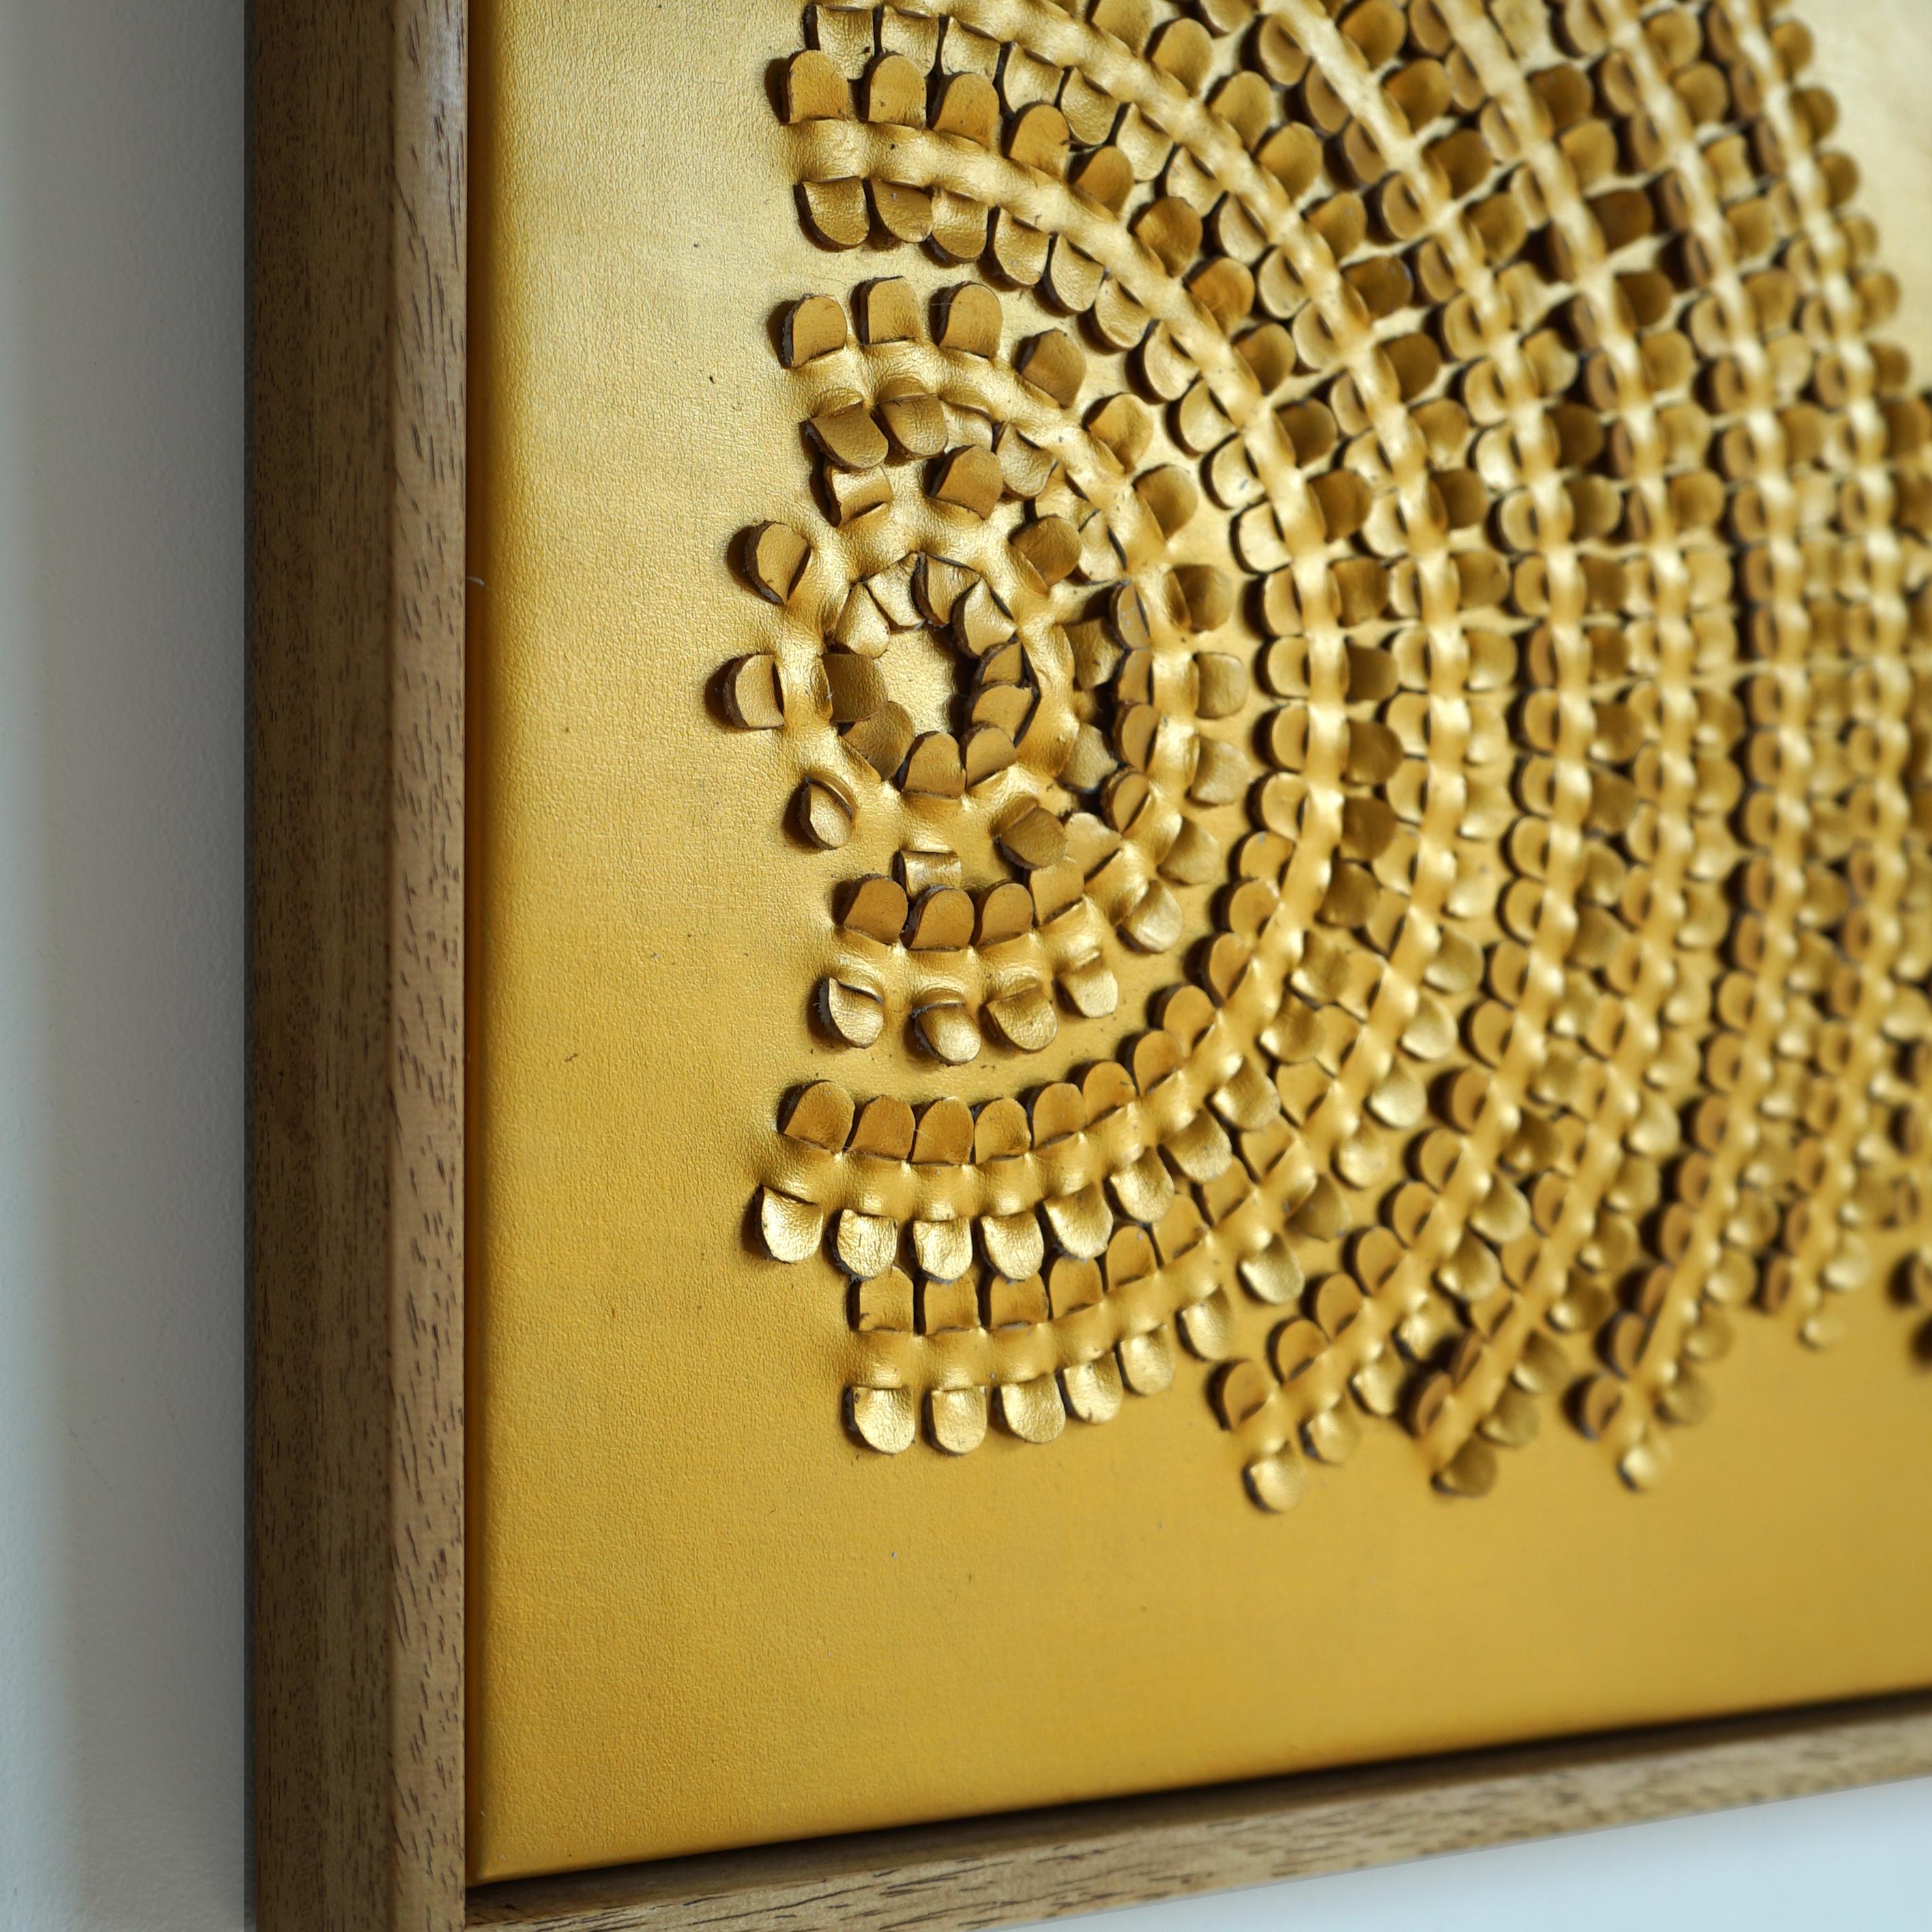 Wave:

A piece of 3D sculptural wall art designed and made from two layers of gold leather, woven together by Louise Heighes.
Measurements are 21 x 21 inches or 54 x 54 cm.

This piece has been inspired by basket weaving.
I love the way a simple